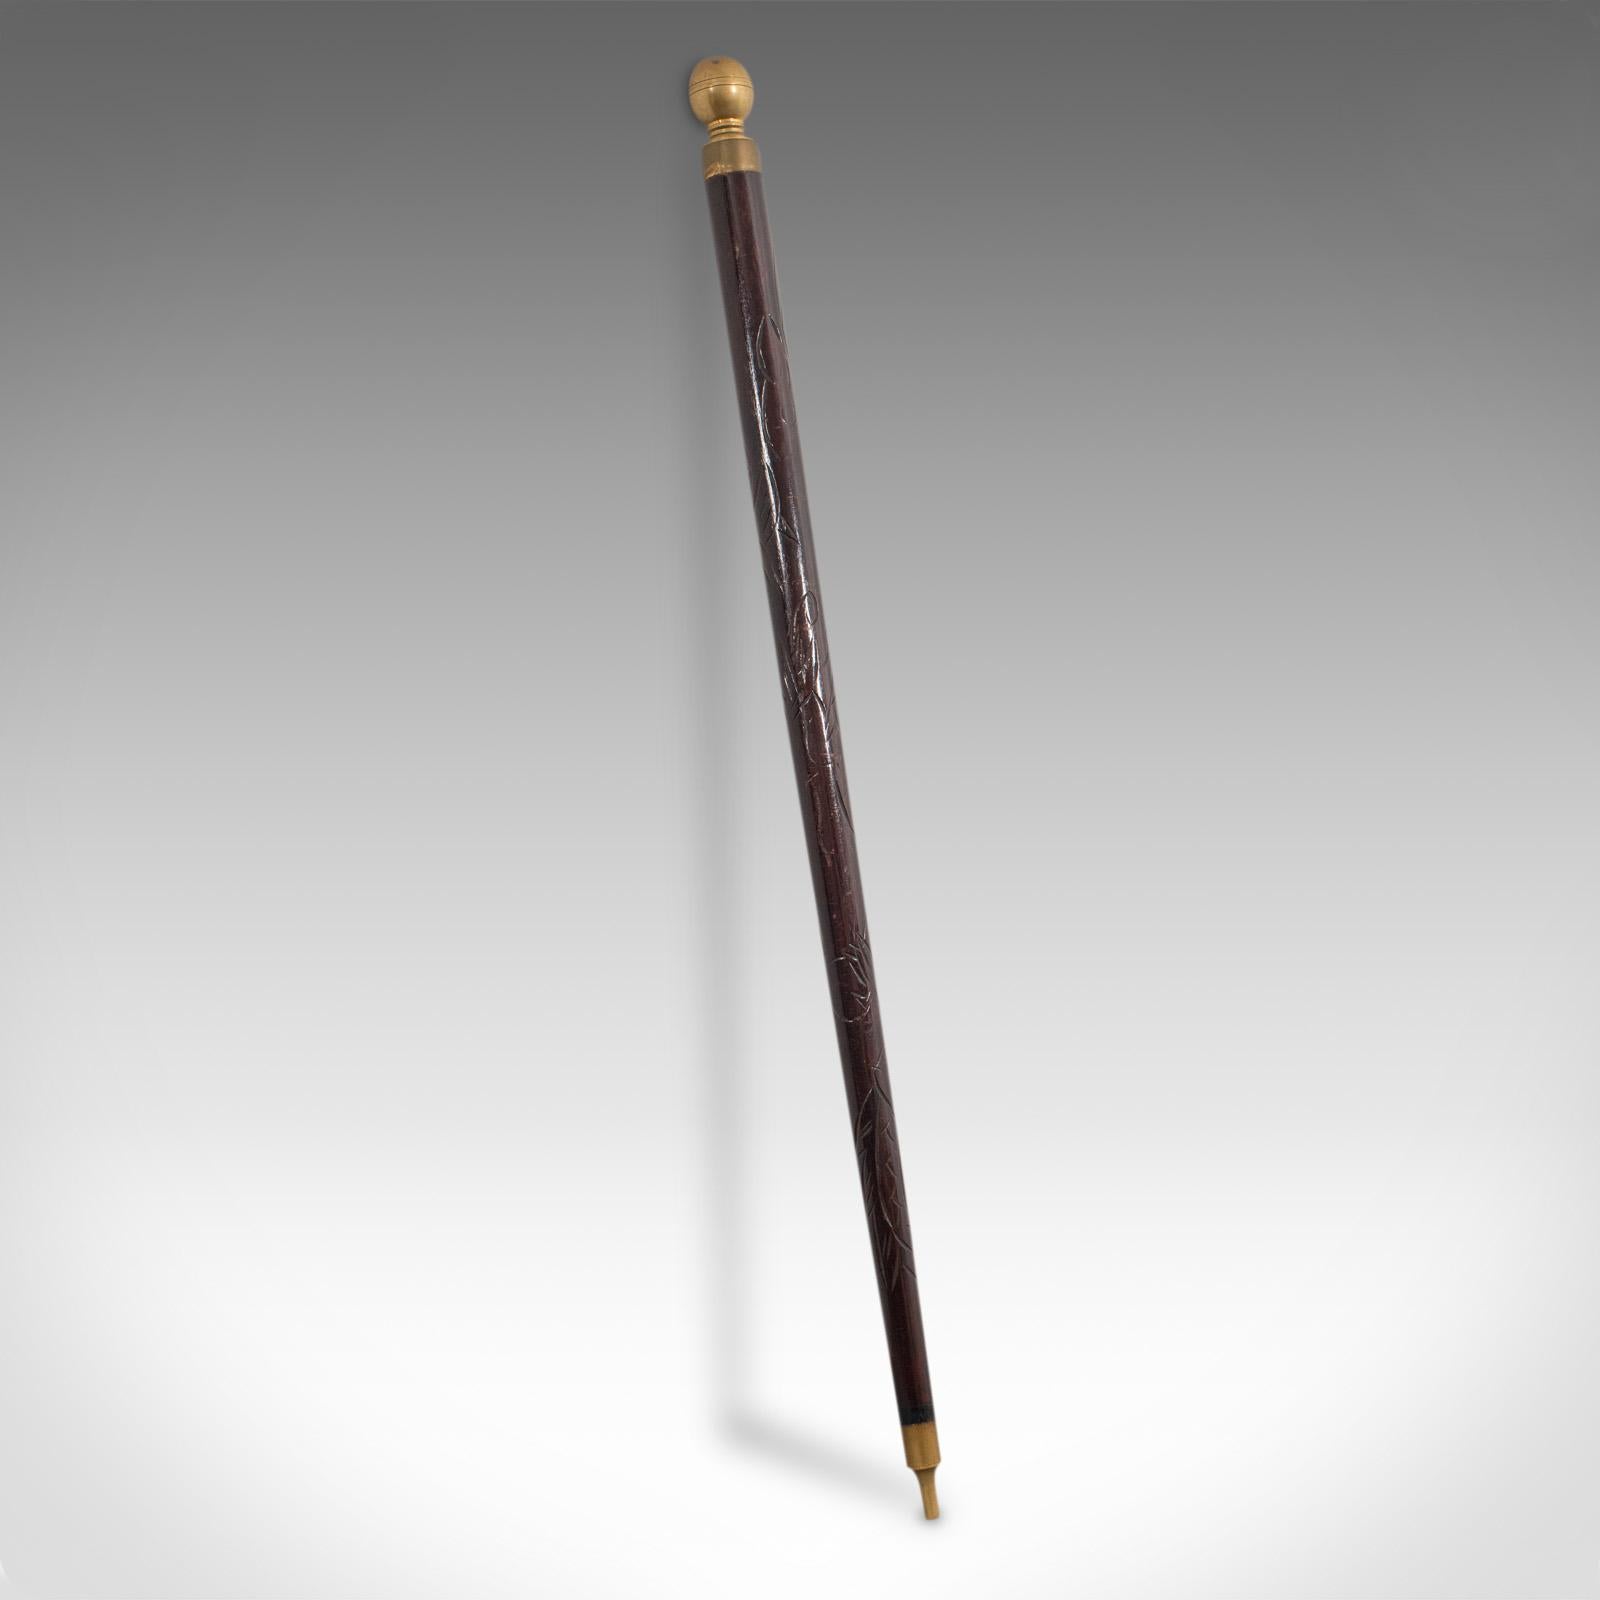 This is a fascinating vintage gadget cane. A Continental, hardwood walking stick with concealed full-size snooker cue, dating to the Art Deco period, circa 1940.

Walk masterfully up to a snooker table and delight the crowd with a hidden